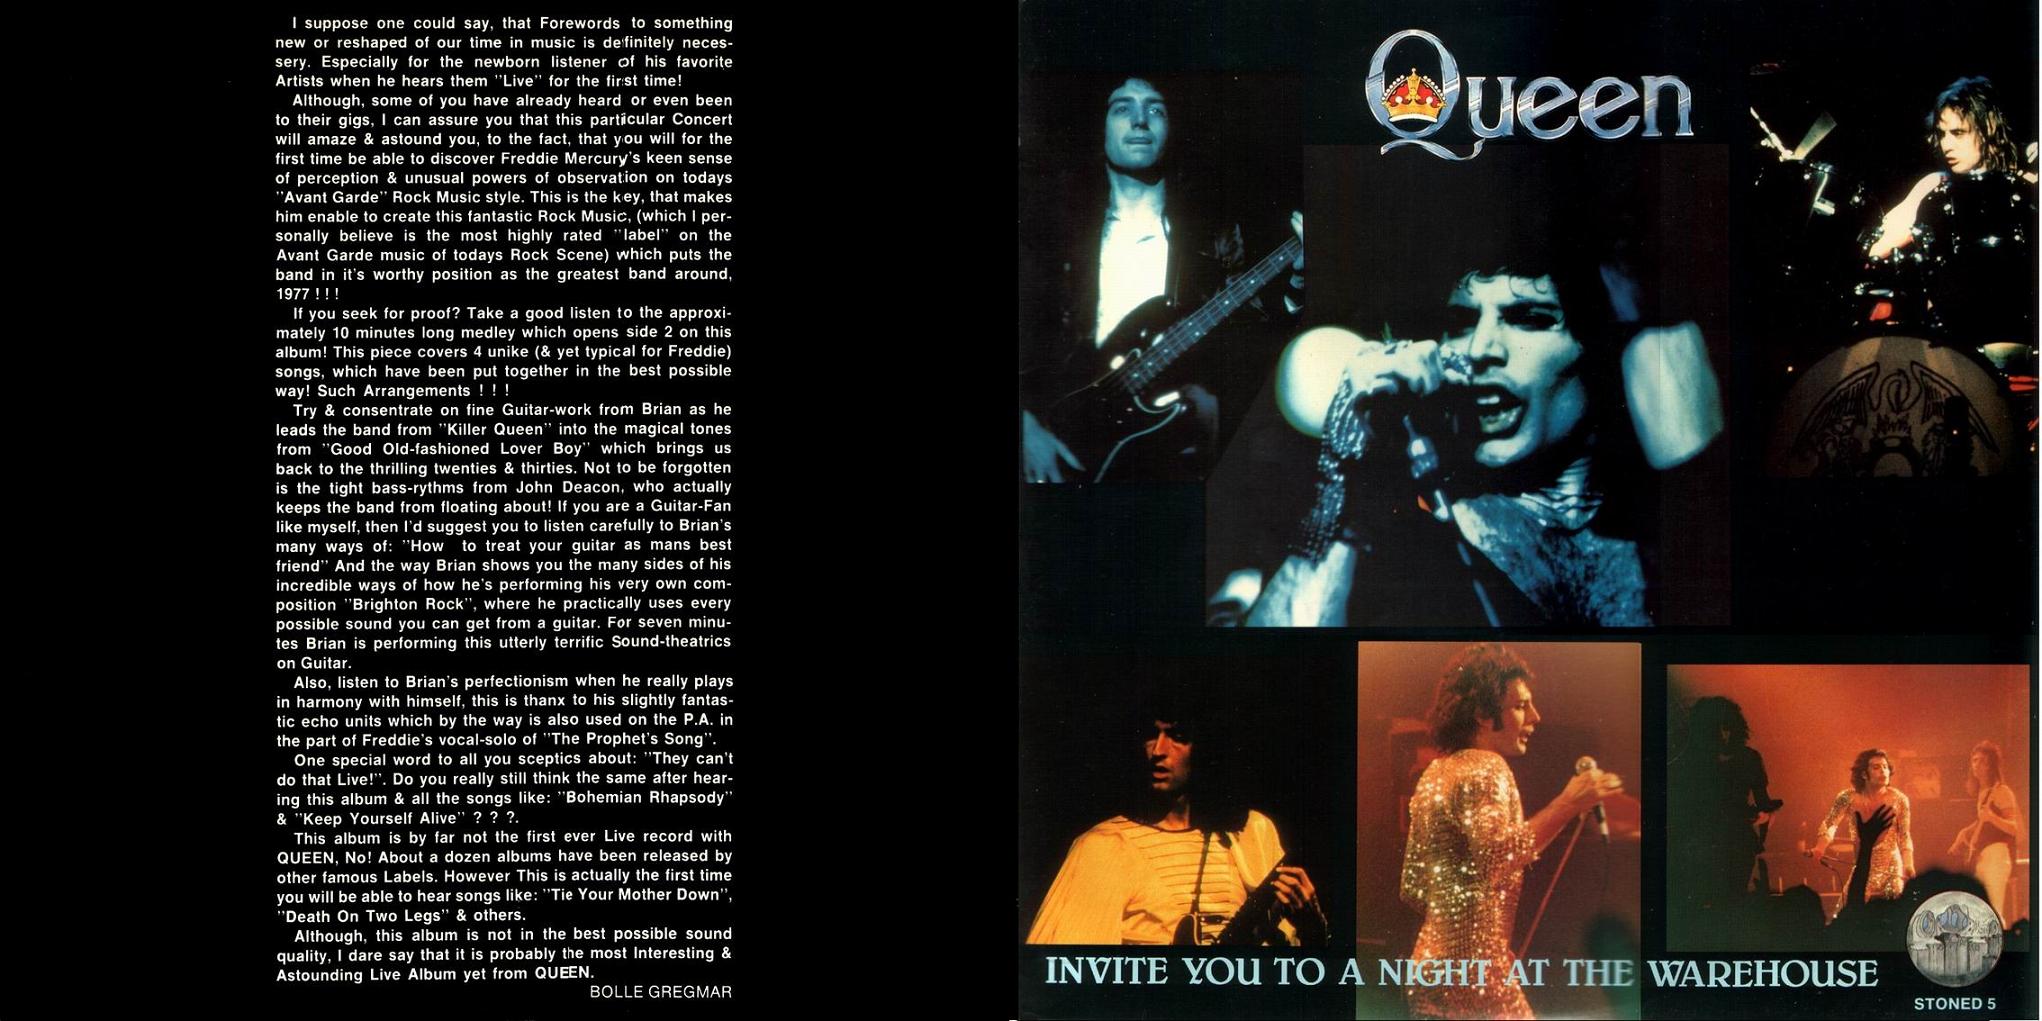 1977-05-12-Invite_you_to_a_night_at_the_warehouse(front)